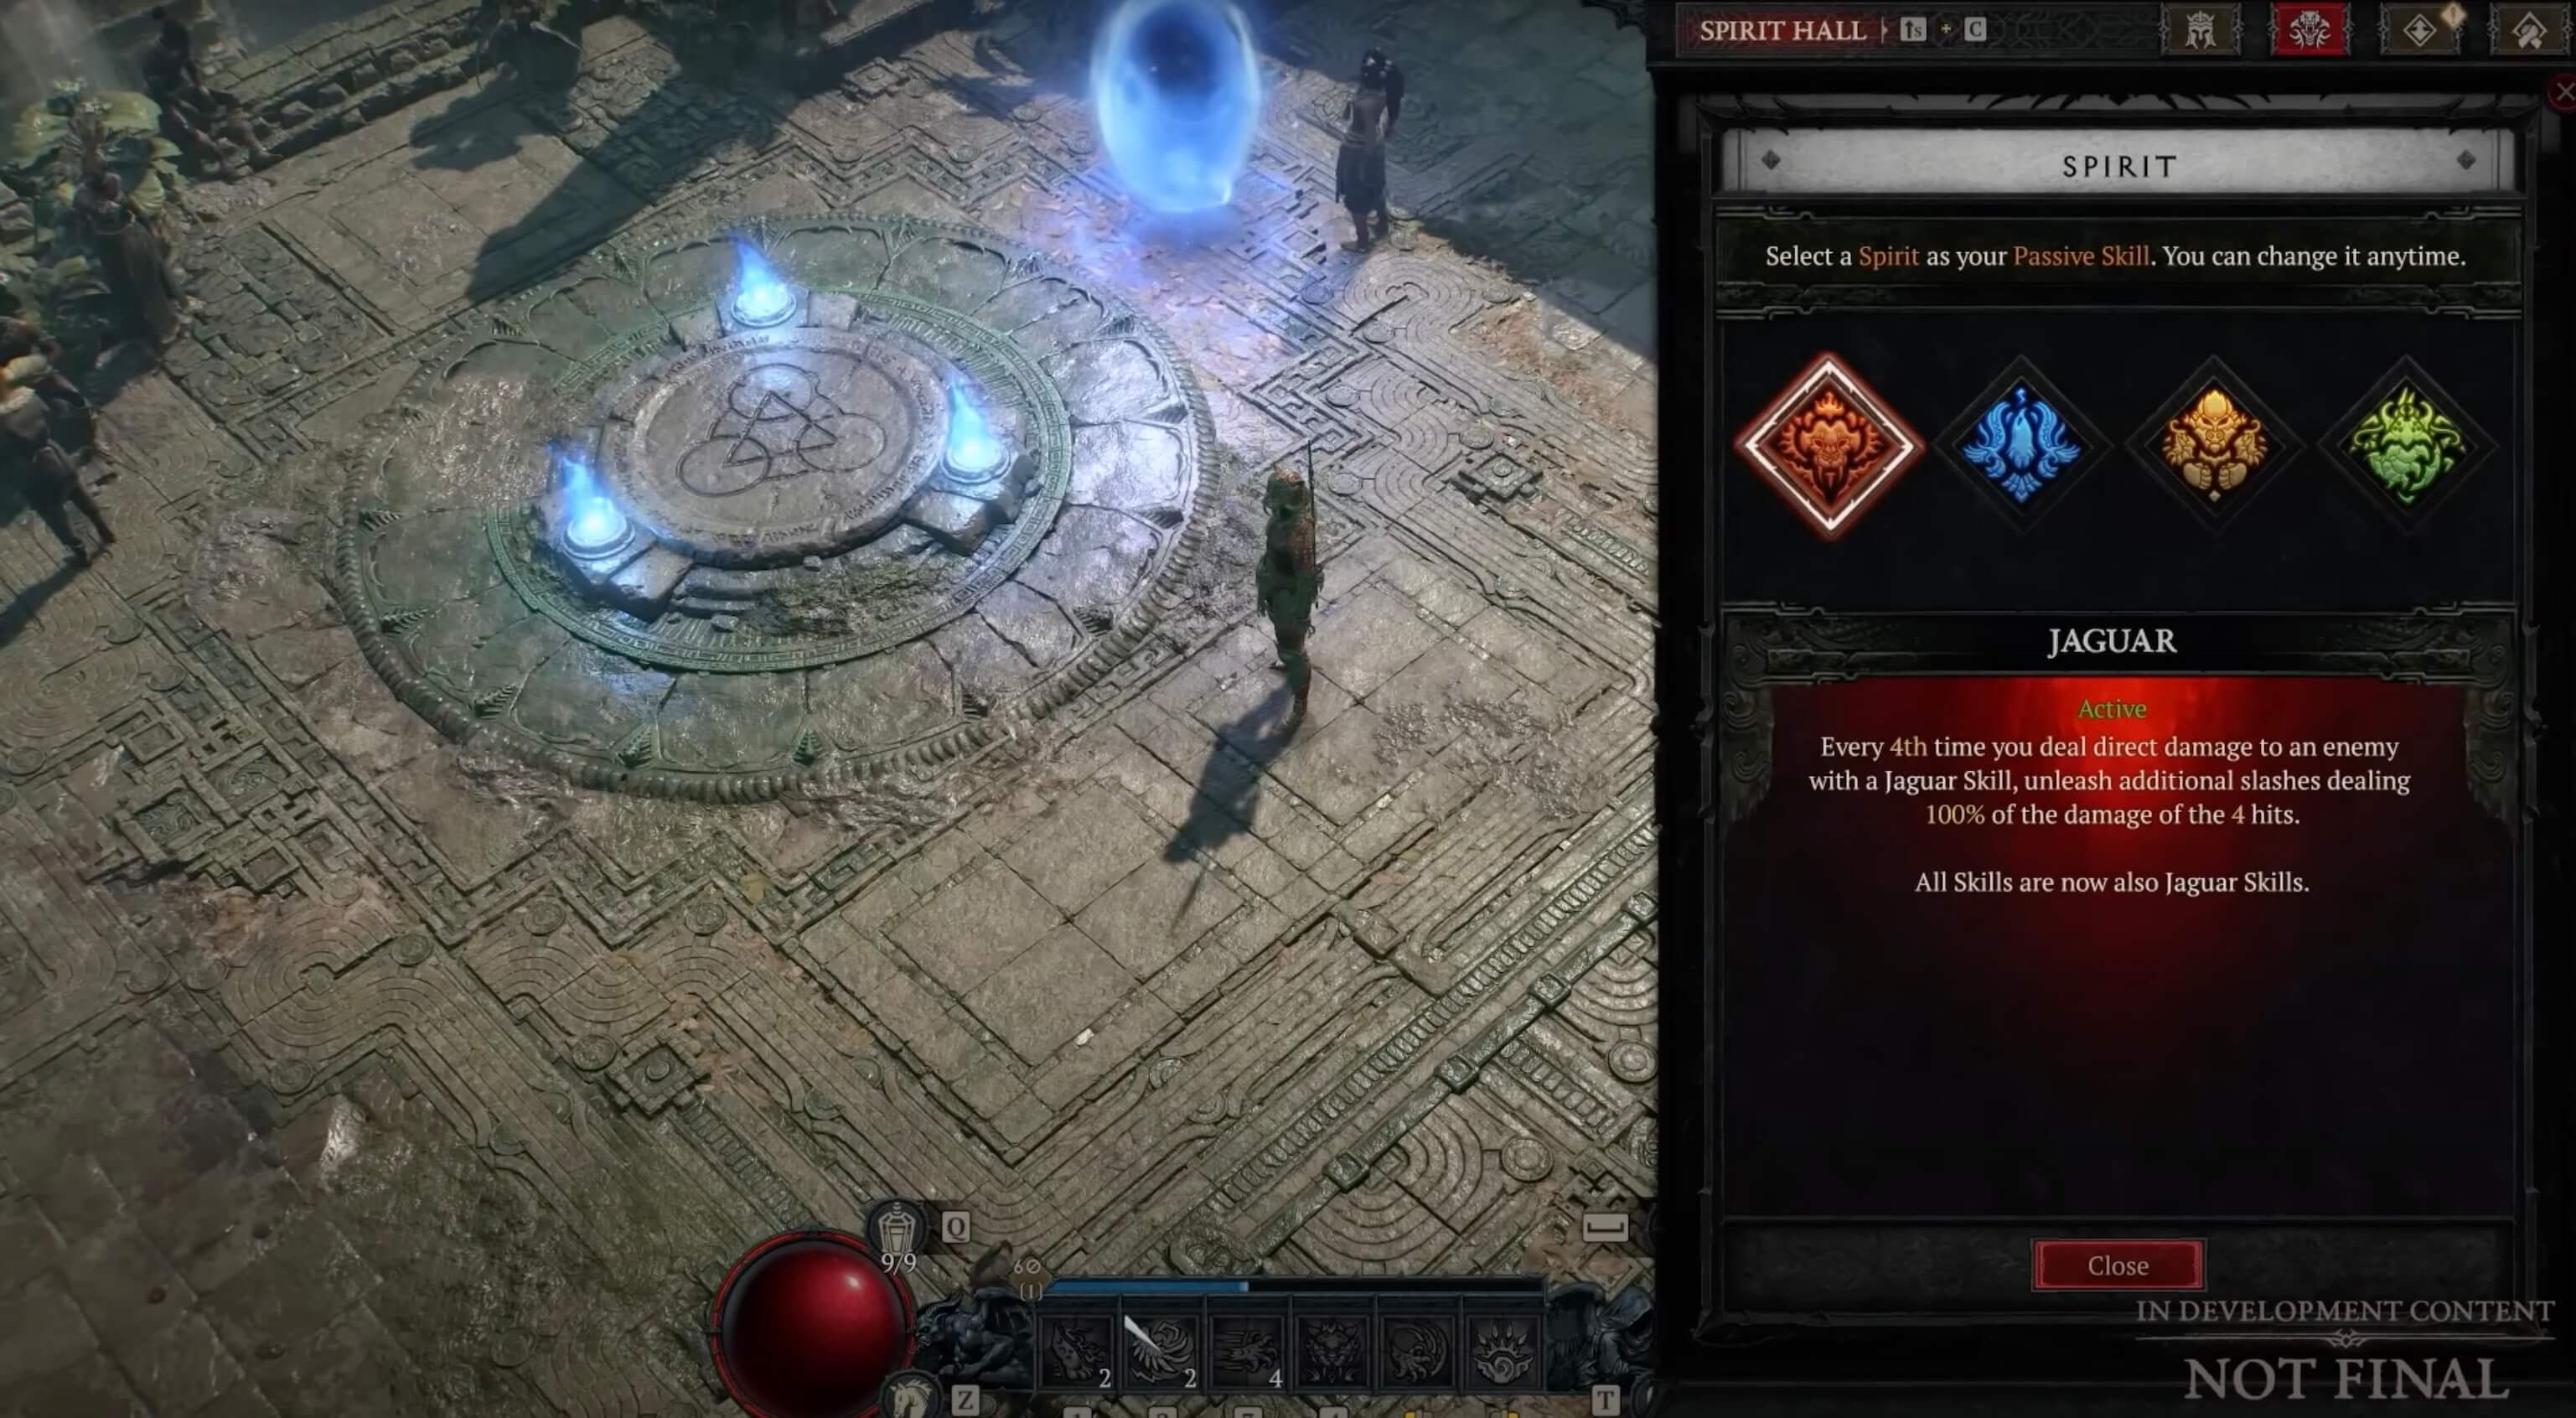 Vessel of Hatred: Possible Level Cap of 60 and Potential Return of Diablo 3 Paragon System?